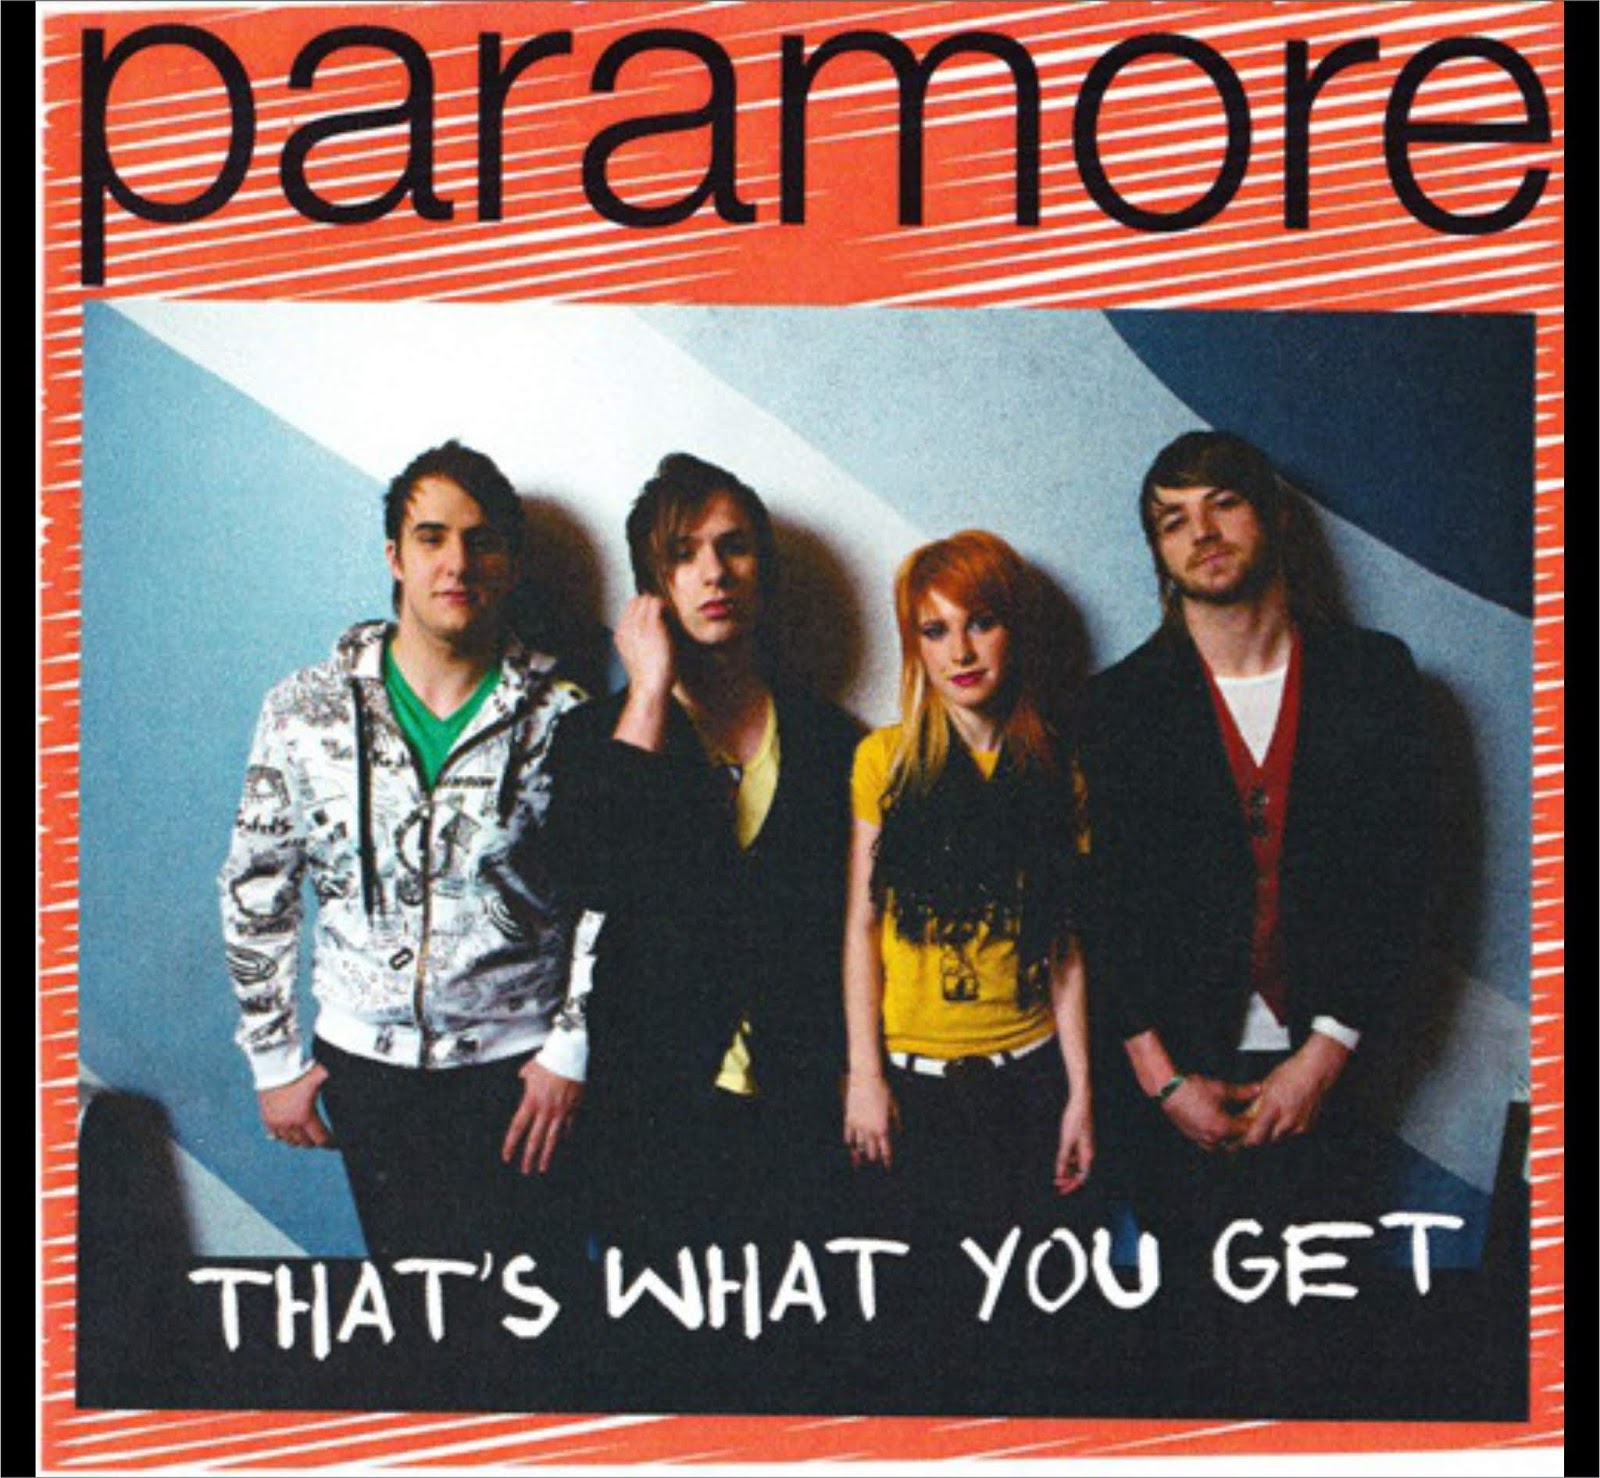 Get this текст. Paramore that's what you get. Paramore: that's what you get перевод.